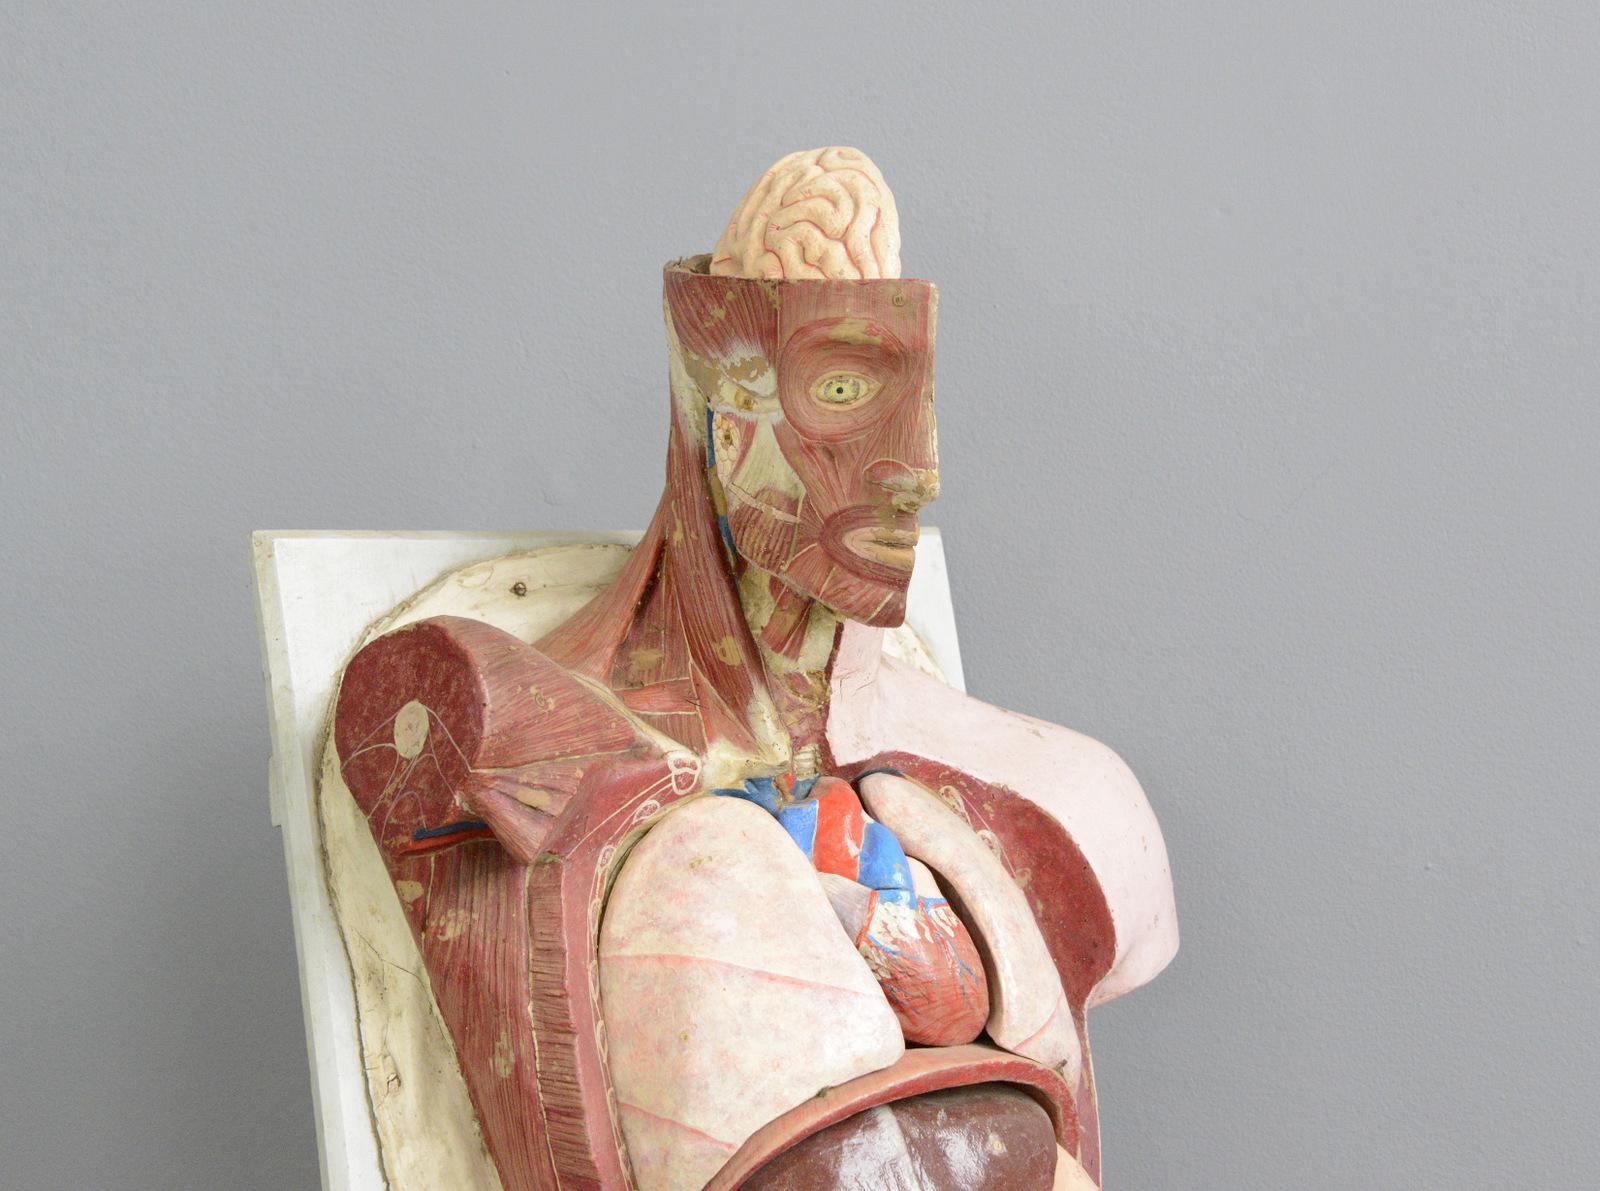 19th century anatomical model by Dr Auzoux.

- Handmade papier mâché removable parts
- Pine back board and Stand
- French, 1860
- Measures: 93cm tall x 43cm wide x 28cm deep

Dr Auzoux

Louis Auzoux obtained a medical degree in 1818 and was